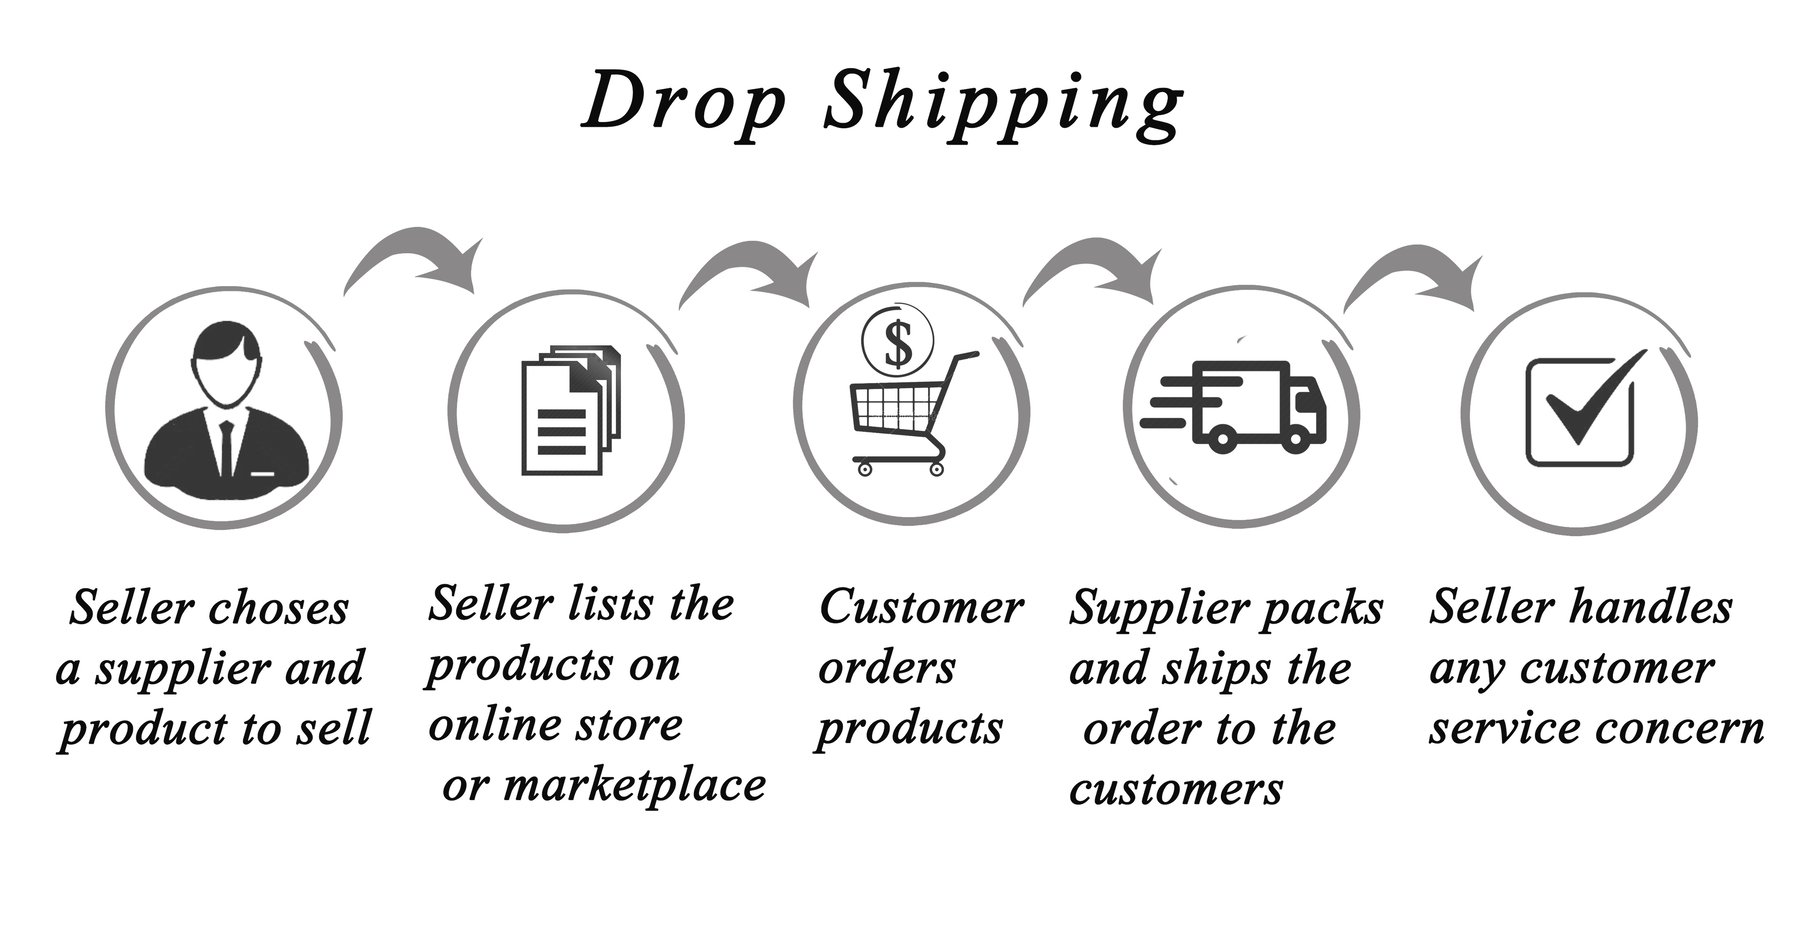 What is a Drop Shipment & What Are the Benefits